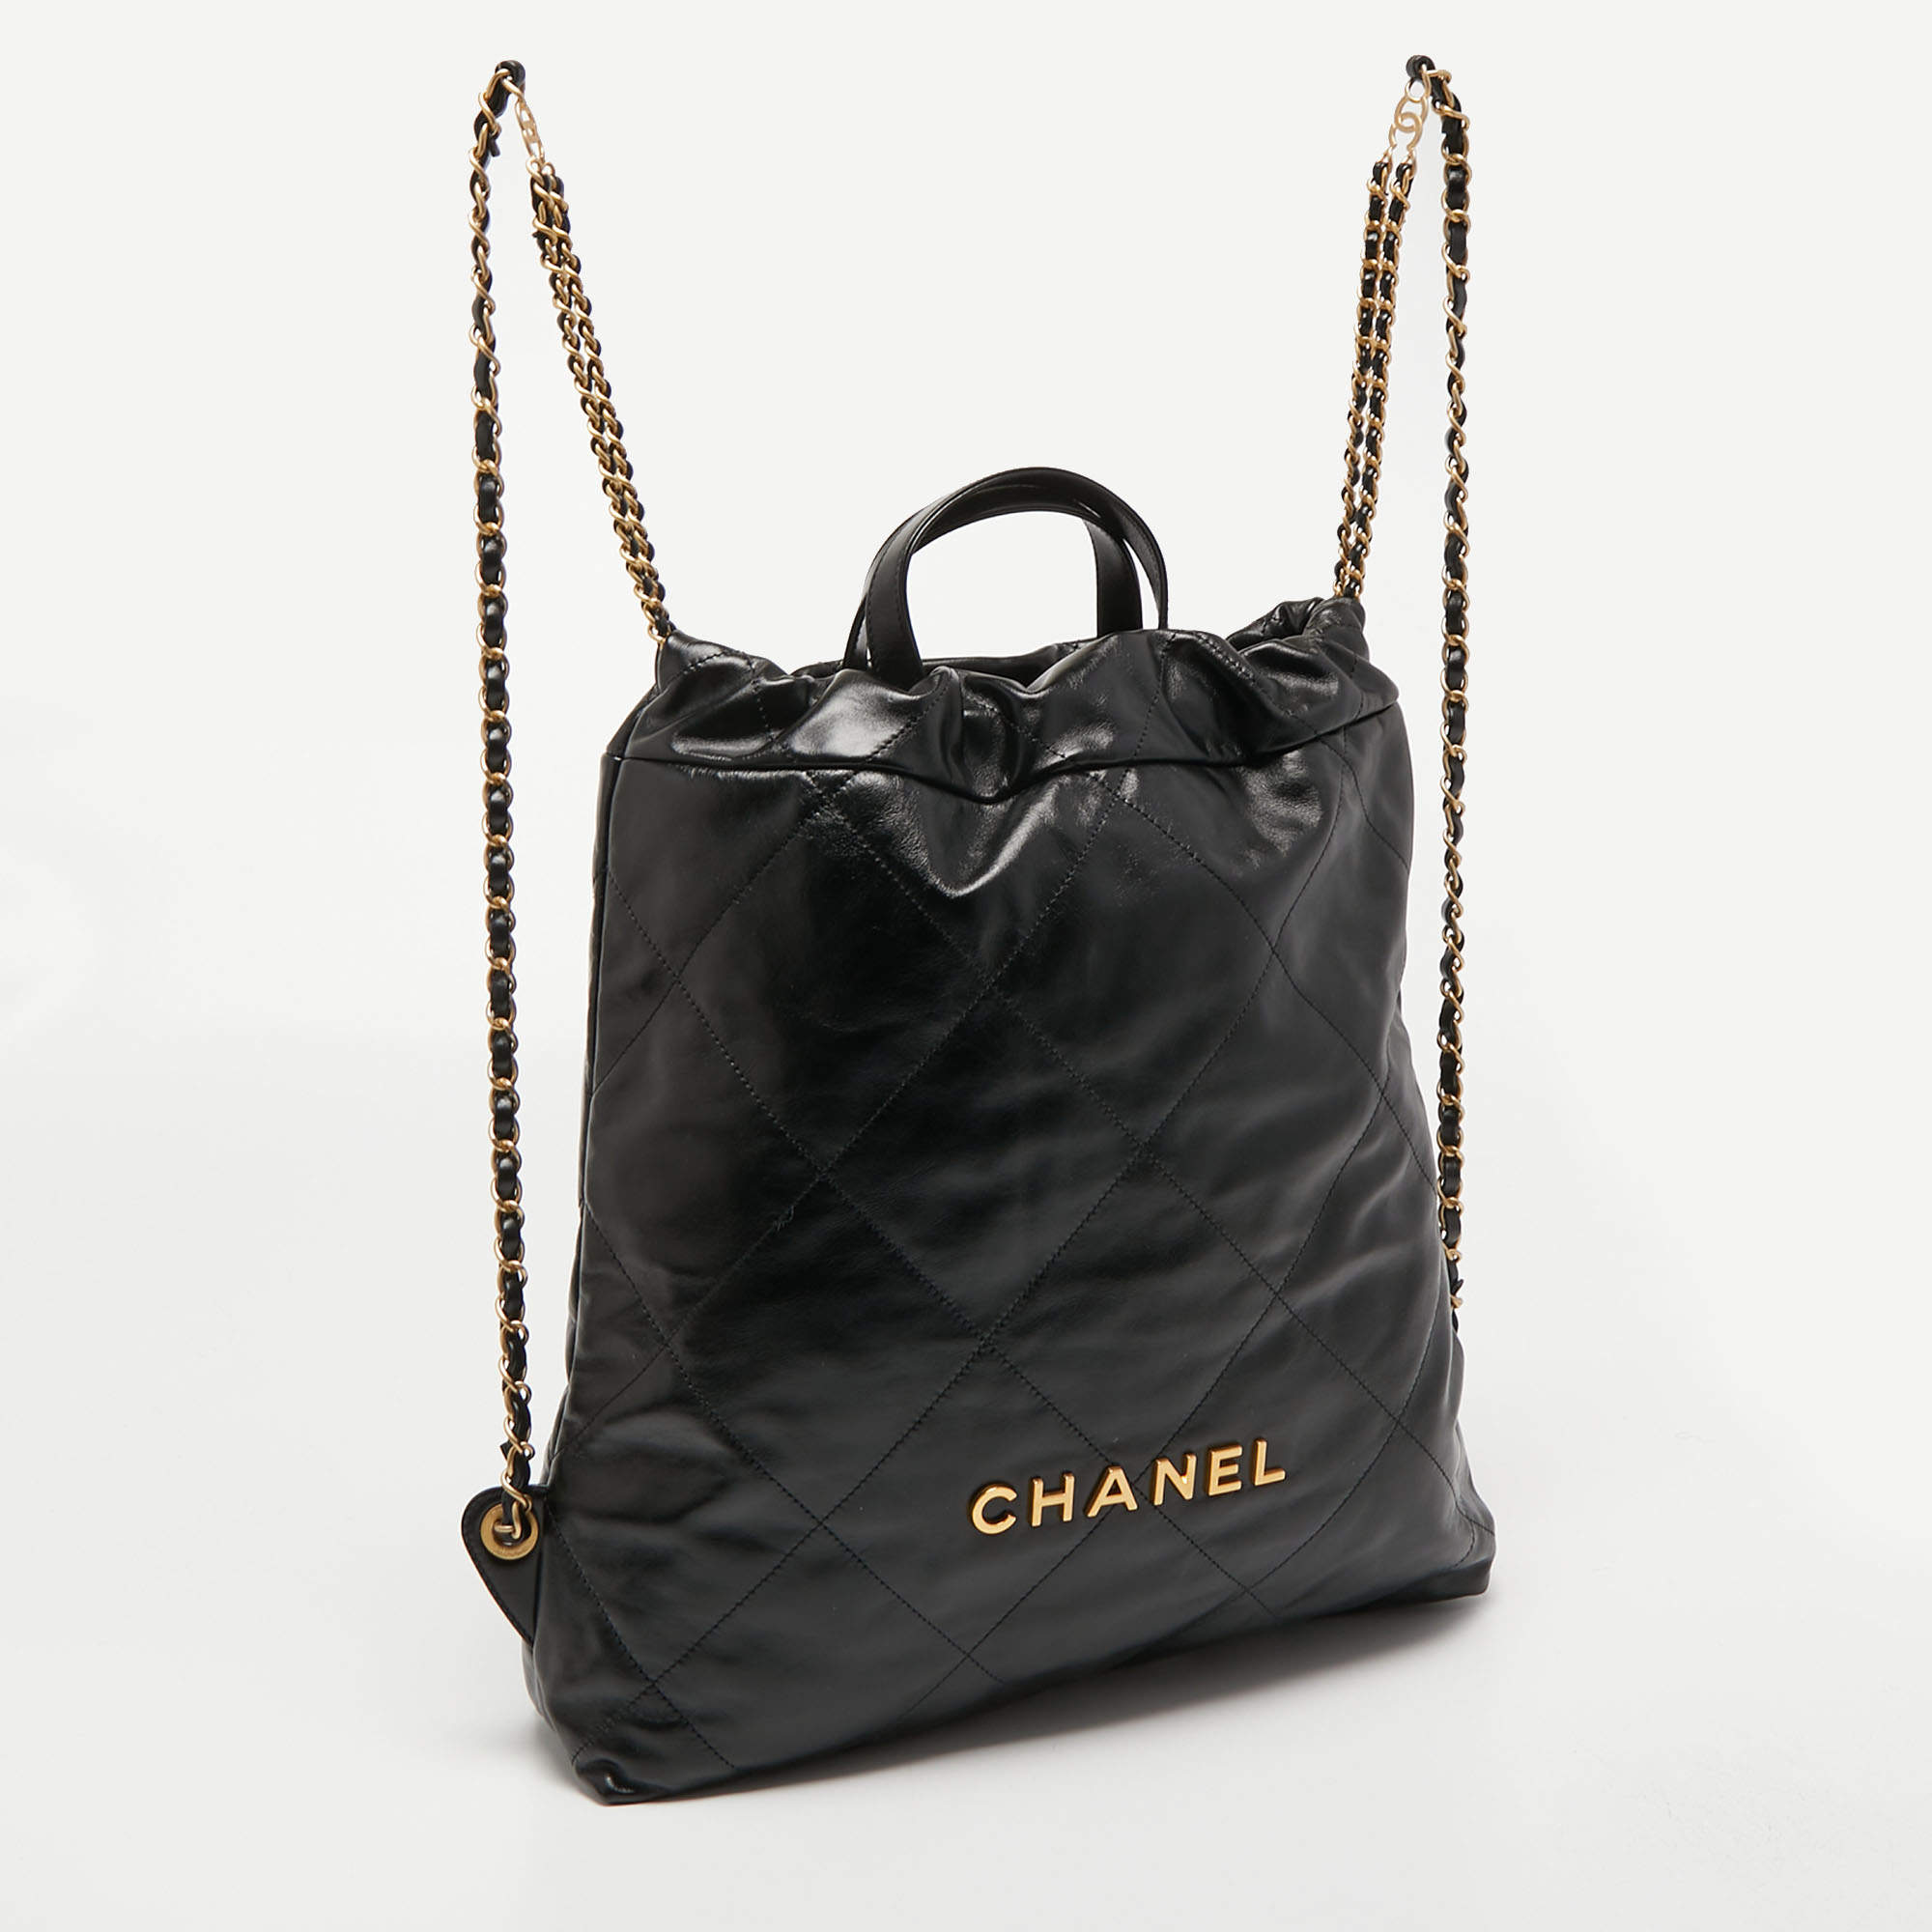 CHANEL Shiny Calfskin Quilted Chanel 22 Backpack Black 1151546